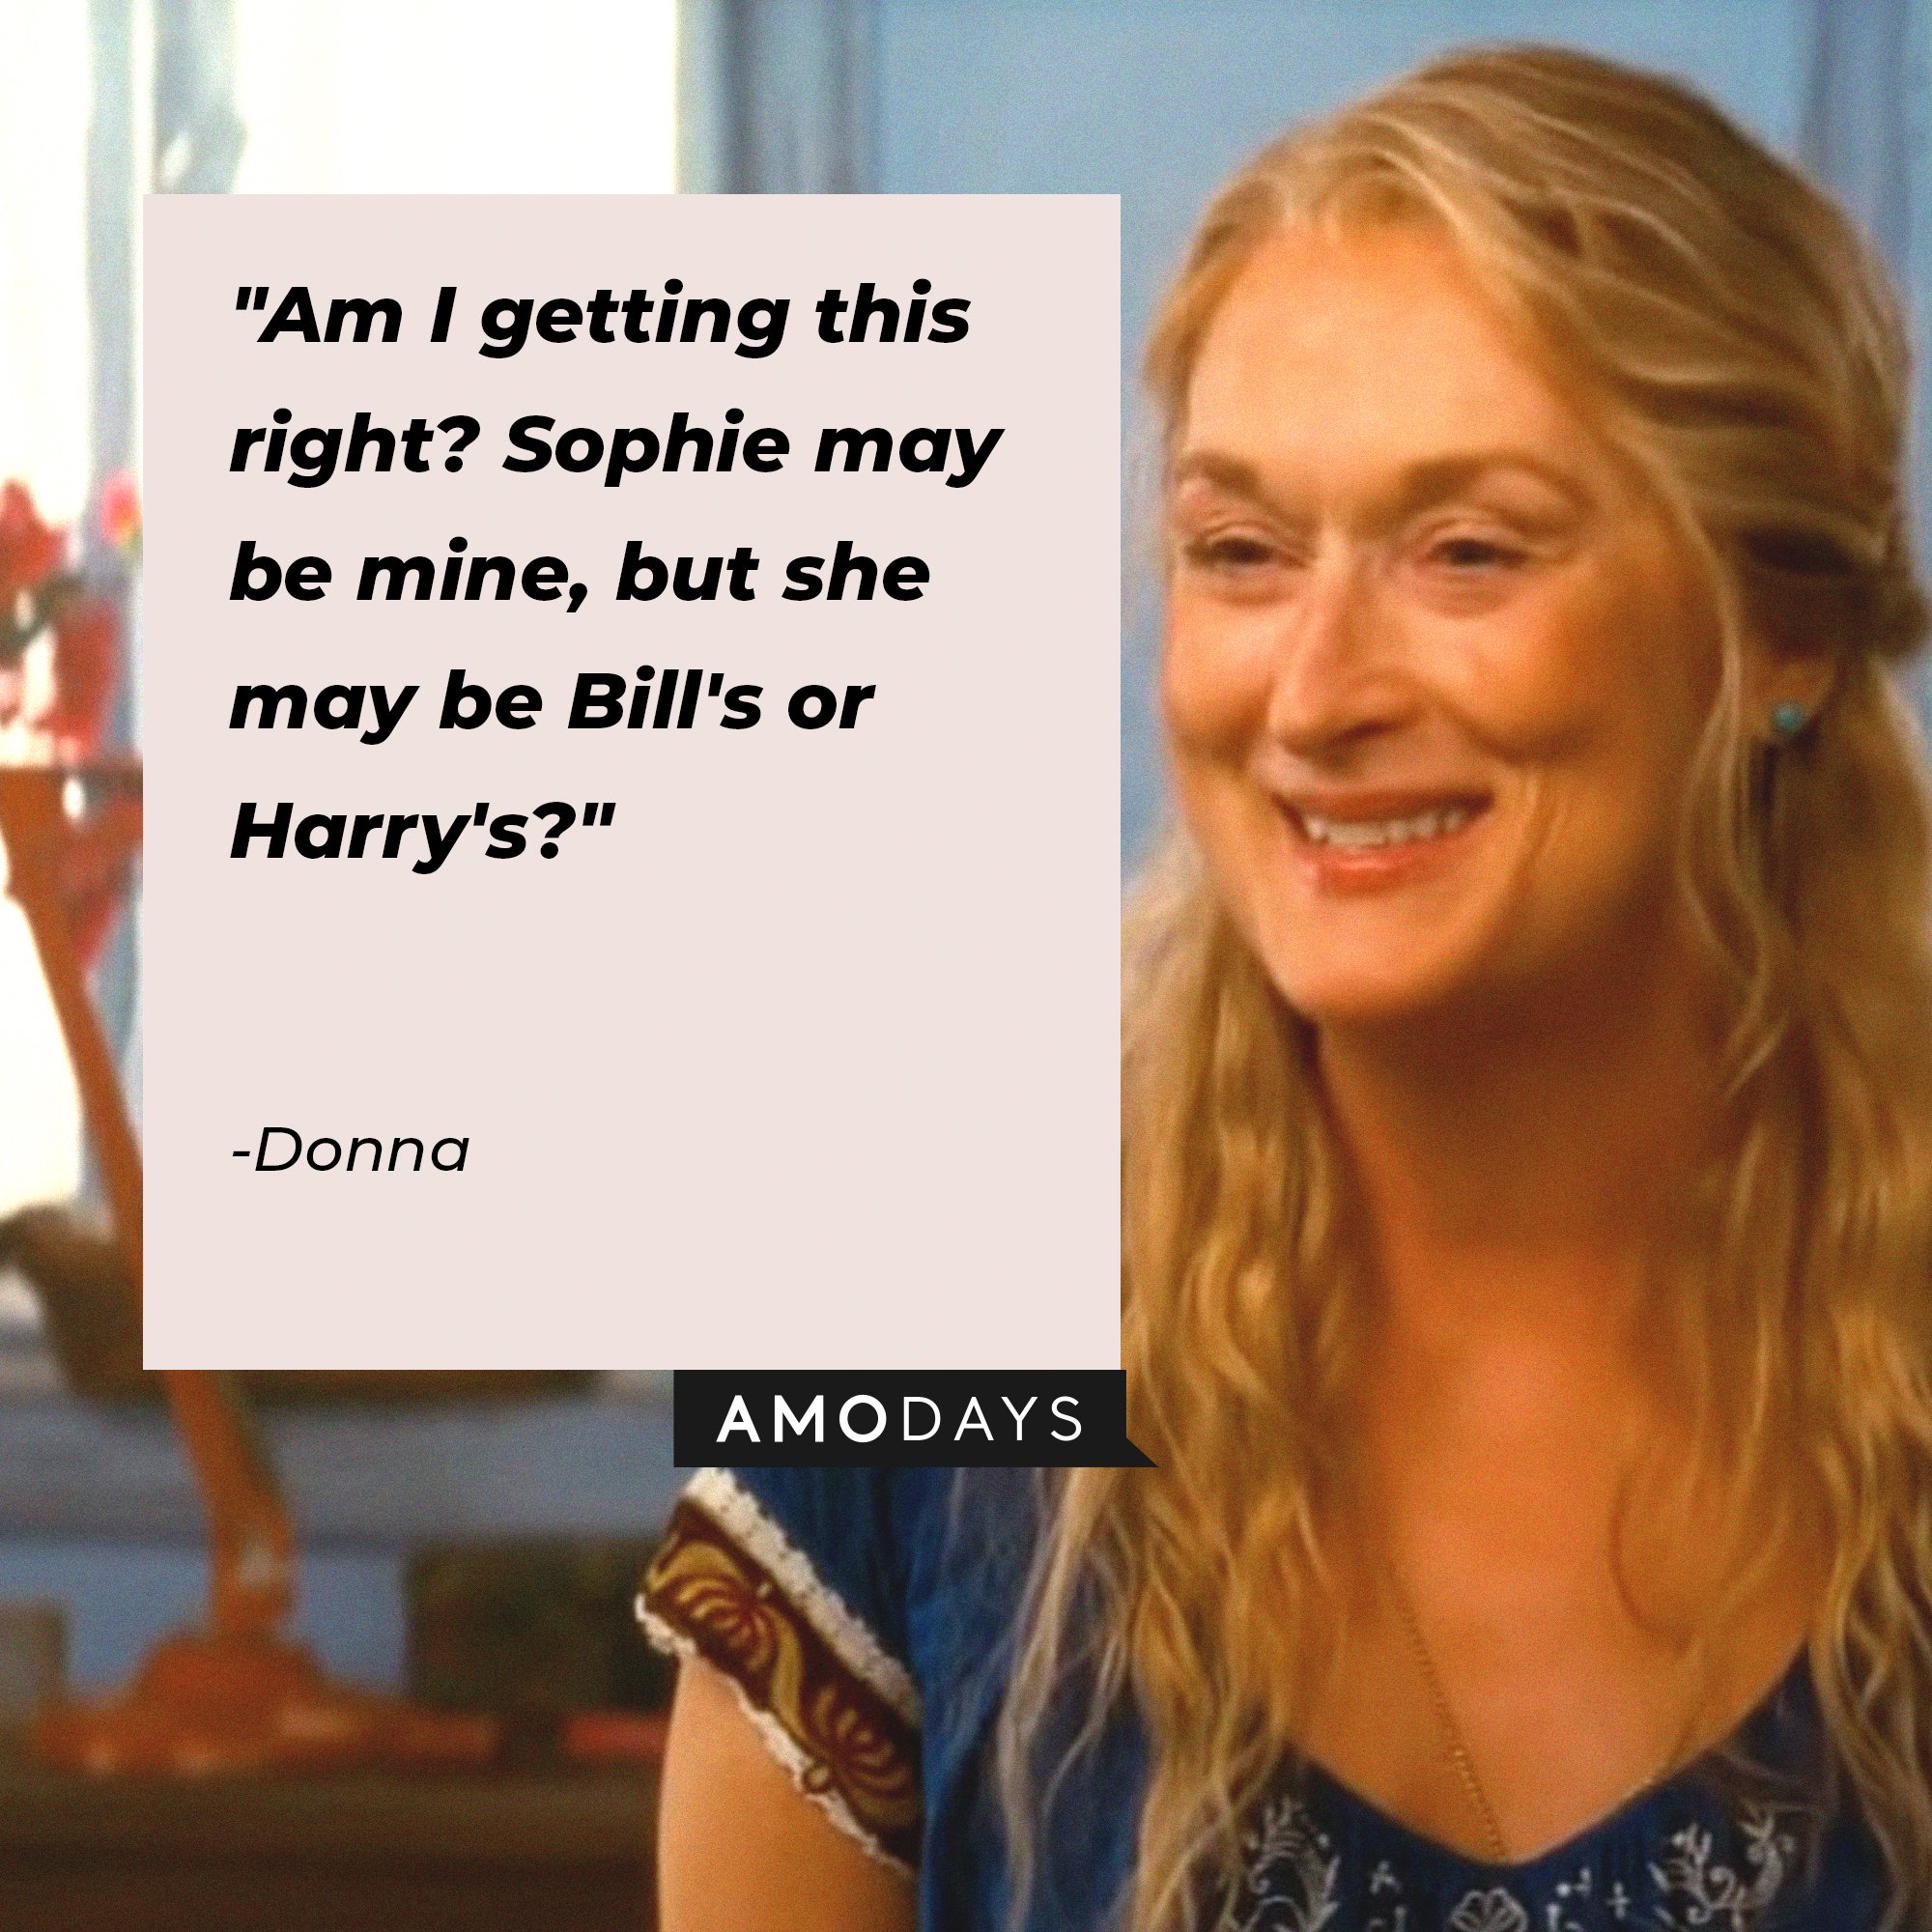 Donna's quote: "Am I getting this right? Sophie may be mine, but she may be Bill's or Harry's?" | Image: AmoDays